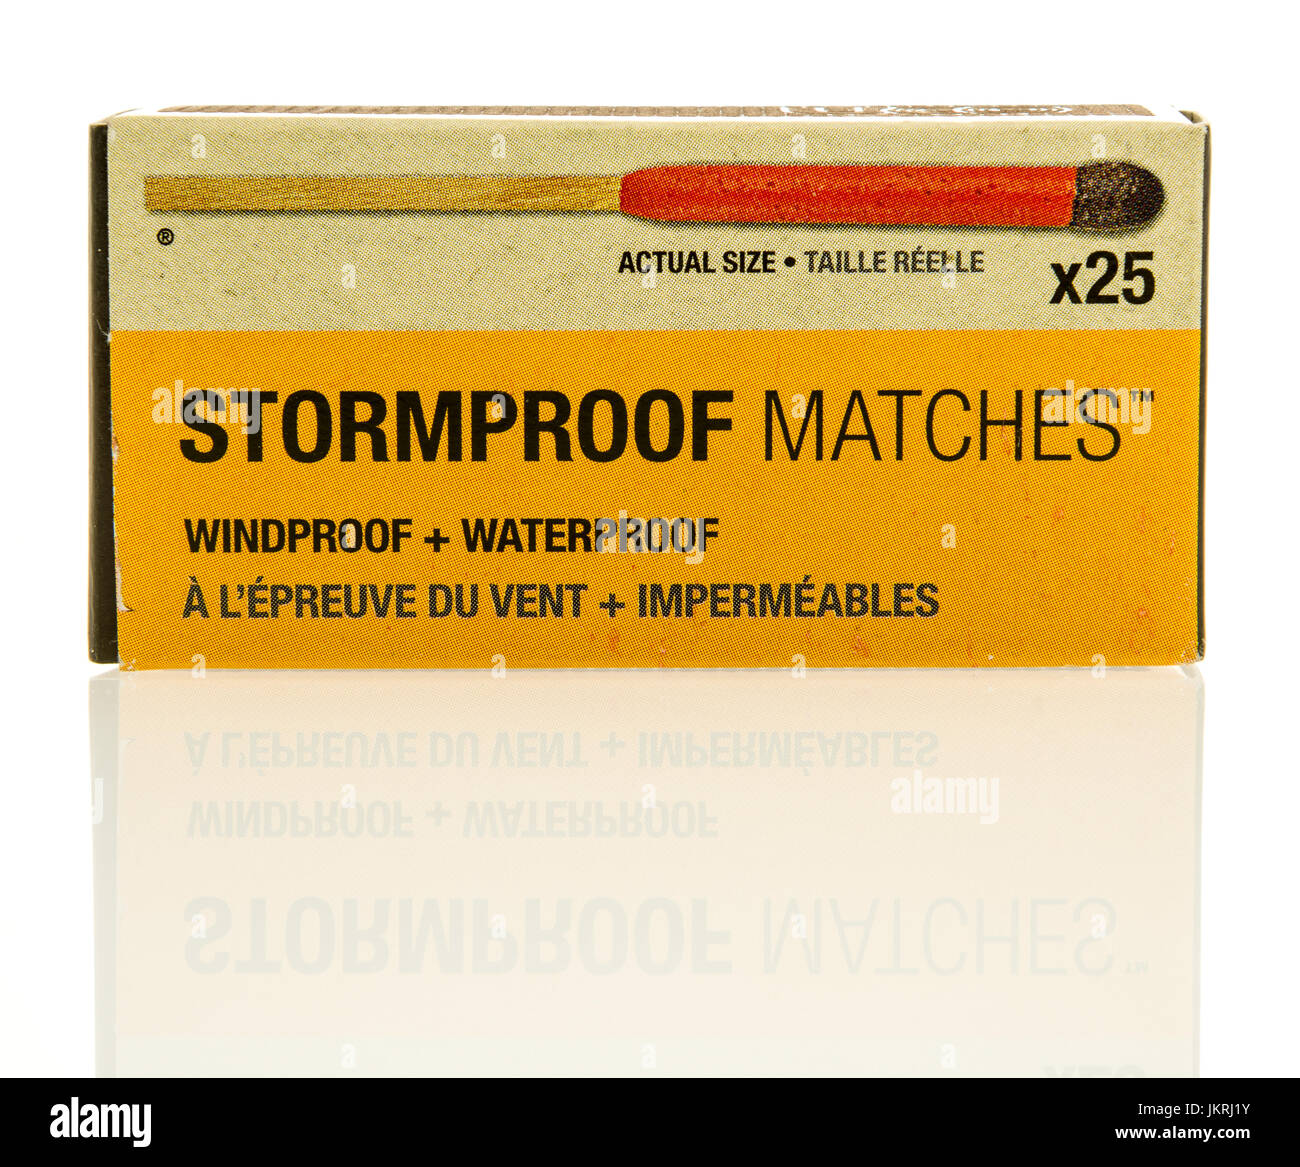 Winneconne, WI - 22 July 2017: A package of Stromproof matches on an isolated background. Stock Photo